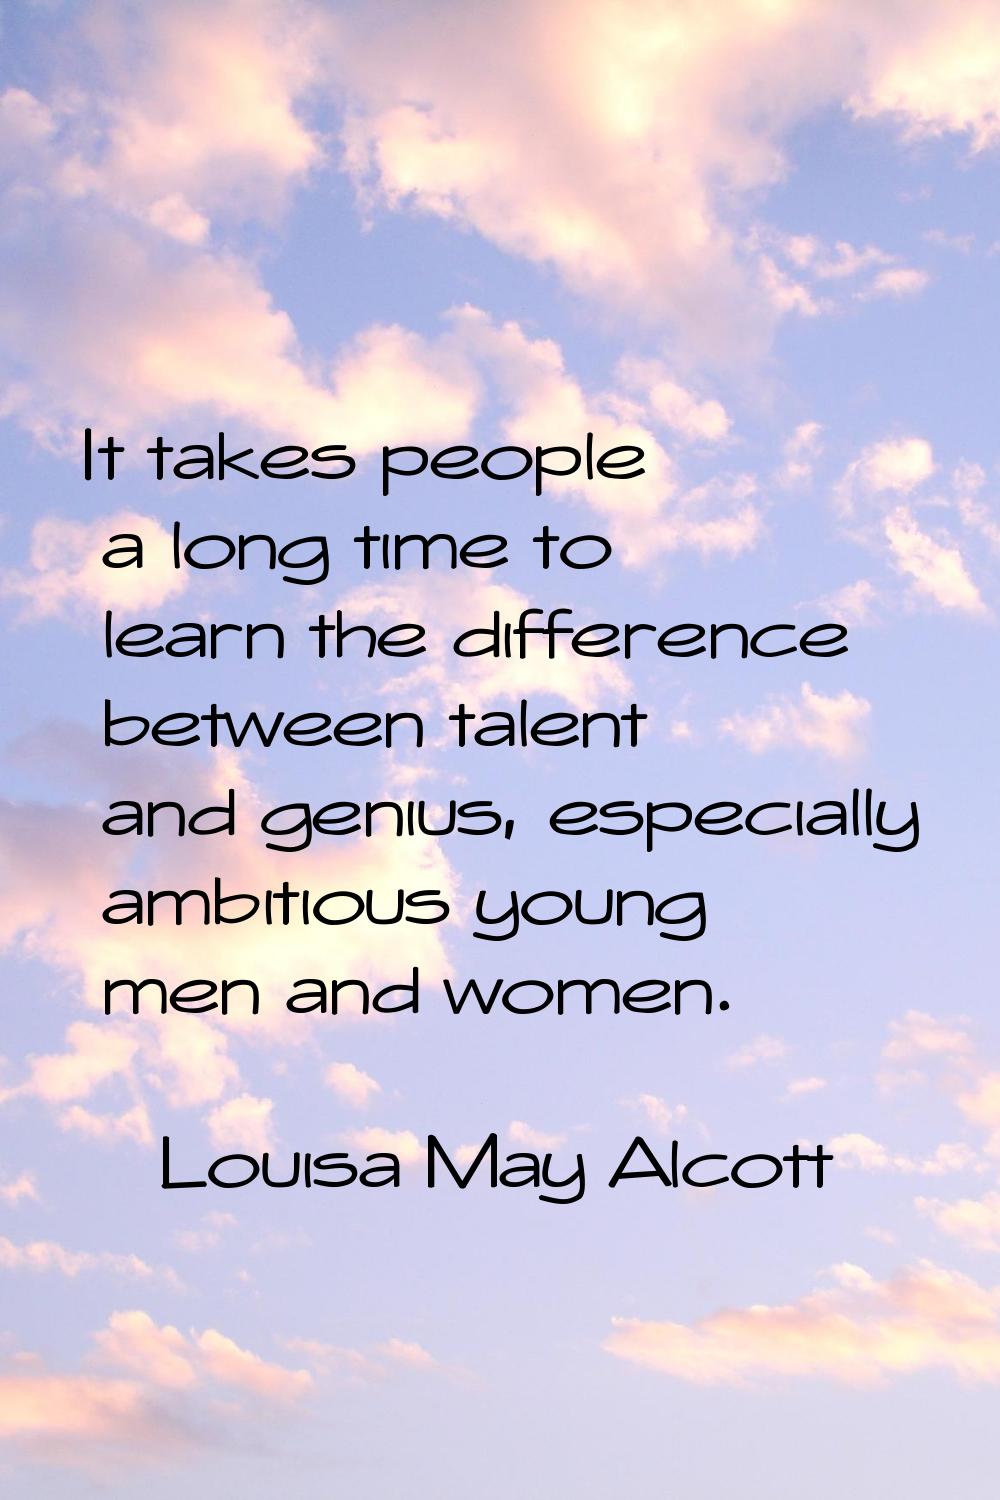 It takes people a long time to learn the difference between talent and genius, especially ambitious